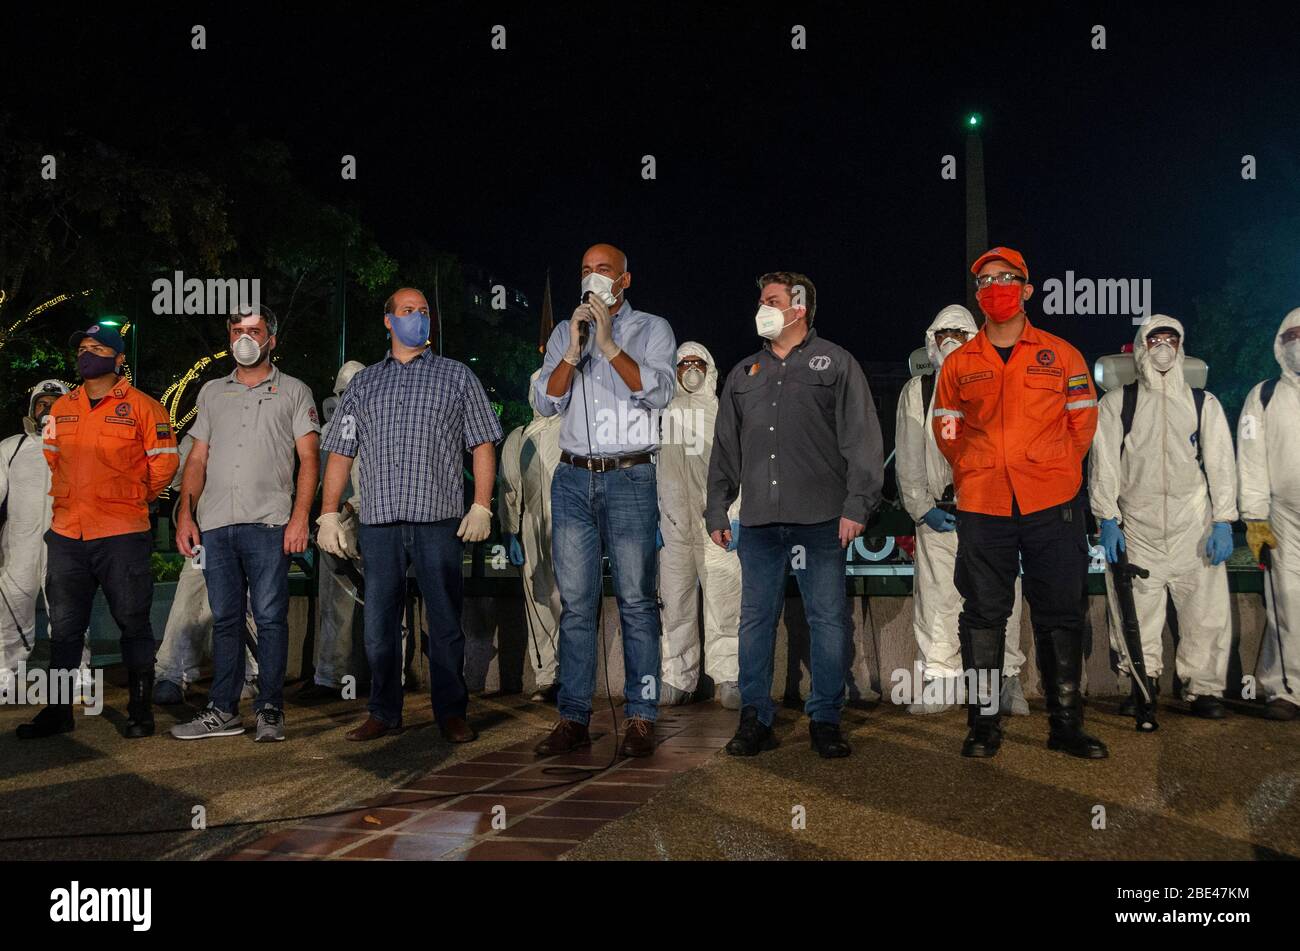 Miranda State Governor Hector Rodriguez explains the next day to be held. Day of night cleaning and disinfection in the streets of Caracas, Venezuela, Stock Photo